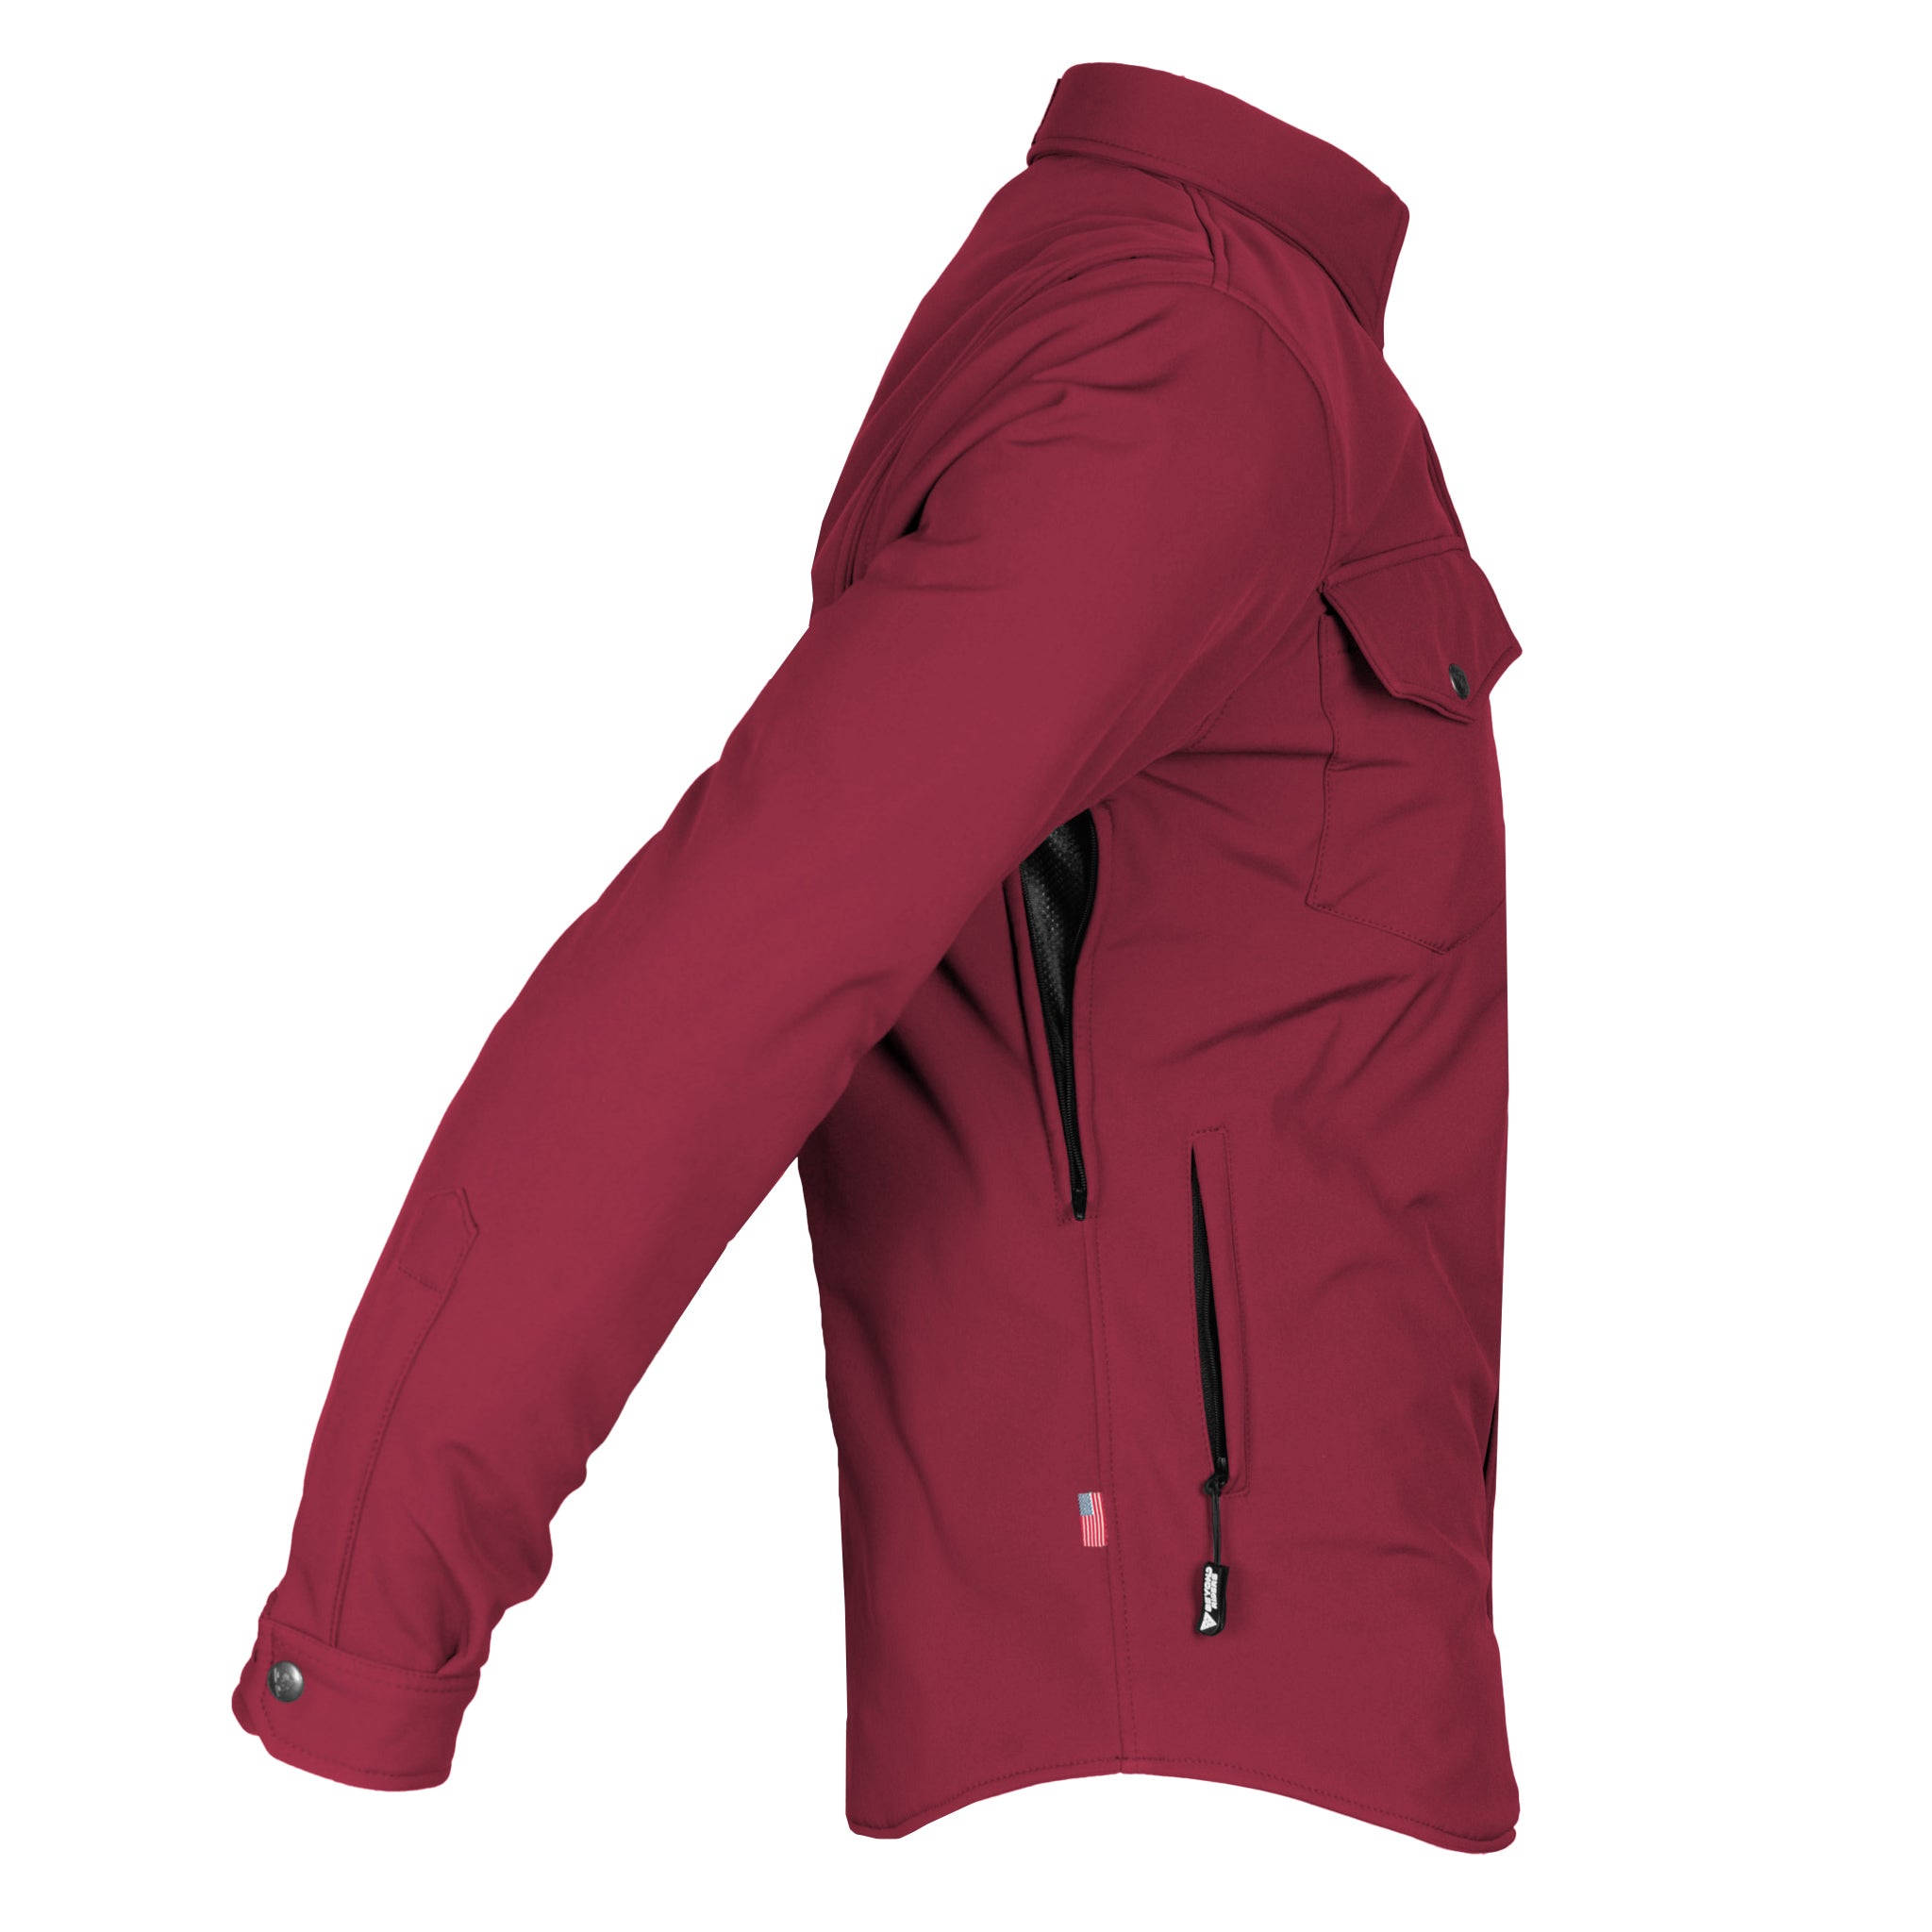 Protective SoftShell Winter Jacket for Men - Red Maroon Matte with Pads